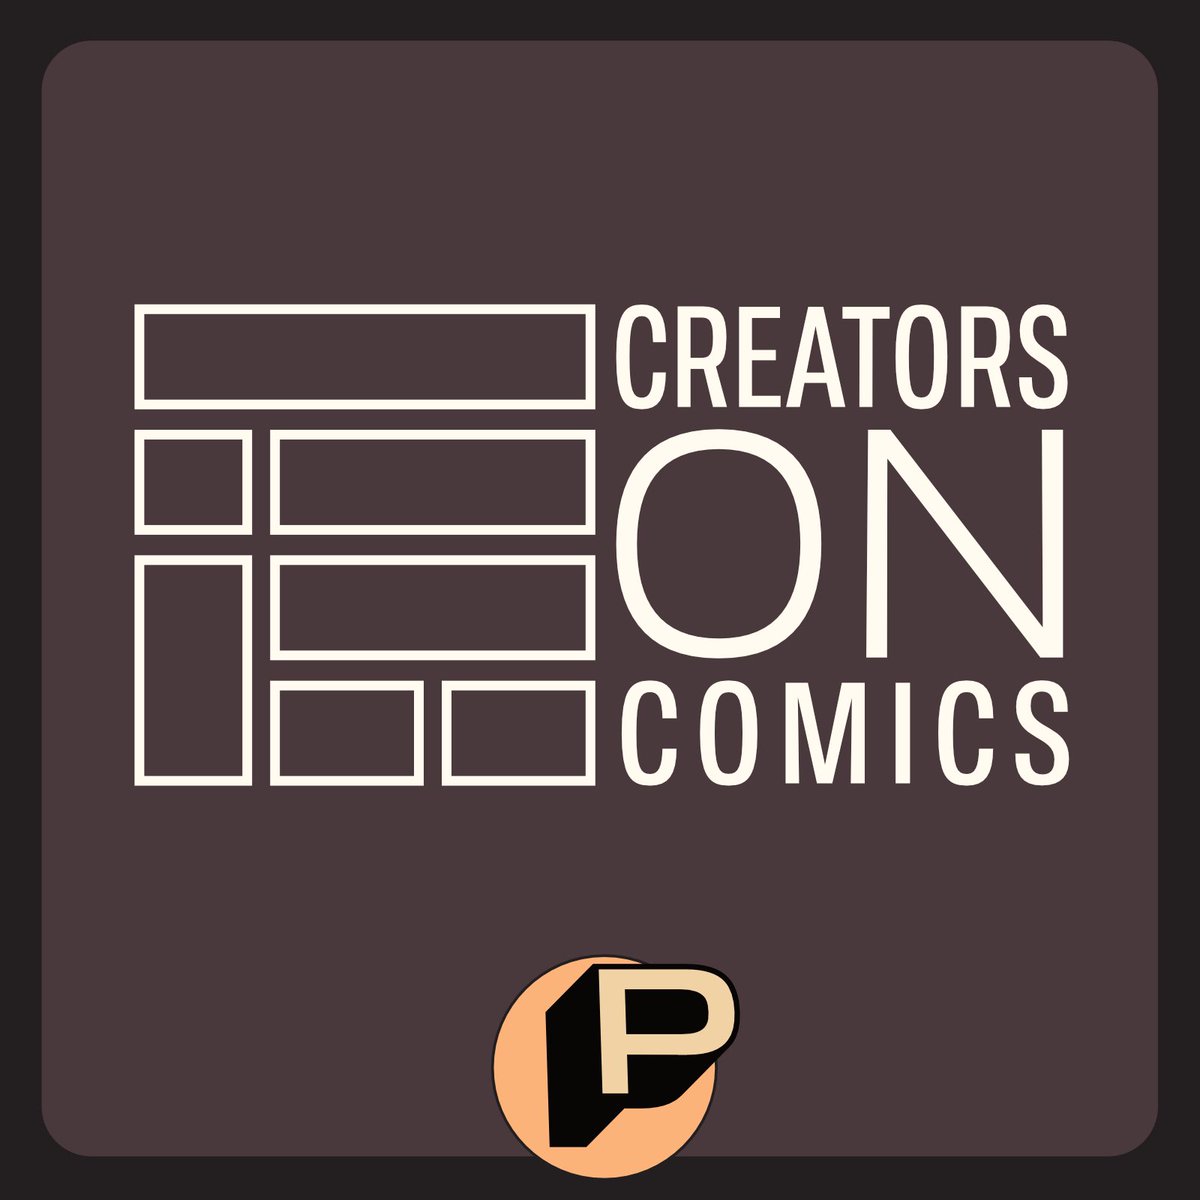 At long last… a new episode of Creators on Comics is here! Featuring @THATdsbarrick & @SquidMantis discussing their @seqmagazine nominated graphic novels Murgatroyd & Nepenthe and Skull Cat and the Curious Castle! Apple podcasts.apple.com/ca/podcast/cre… Spotify open.spotify.com/episode/3sbgde…